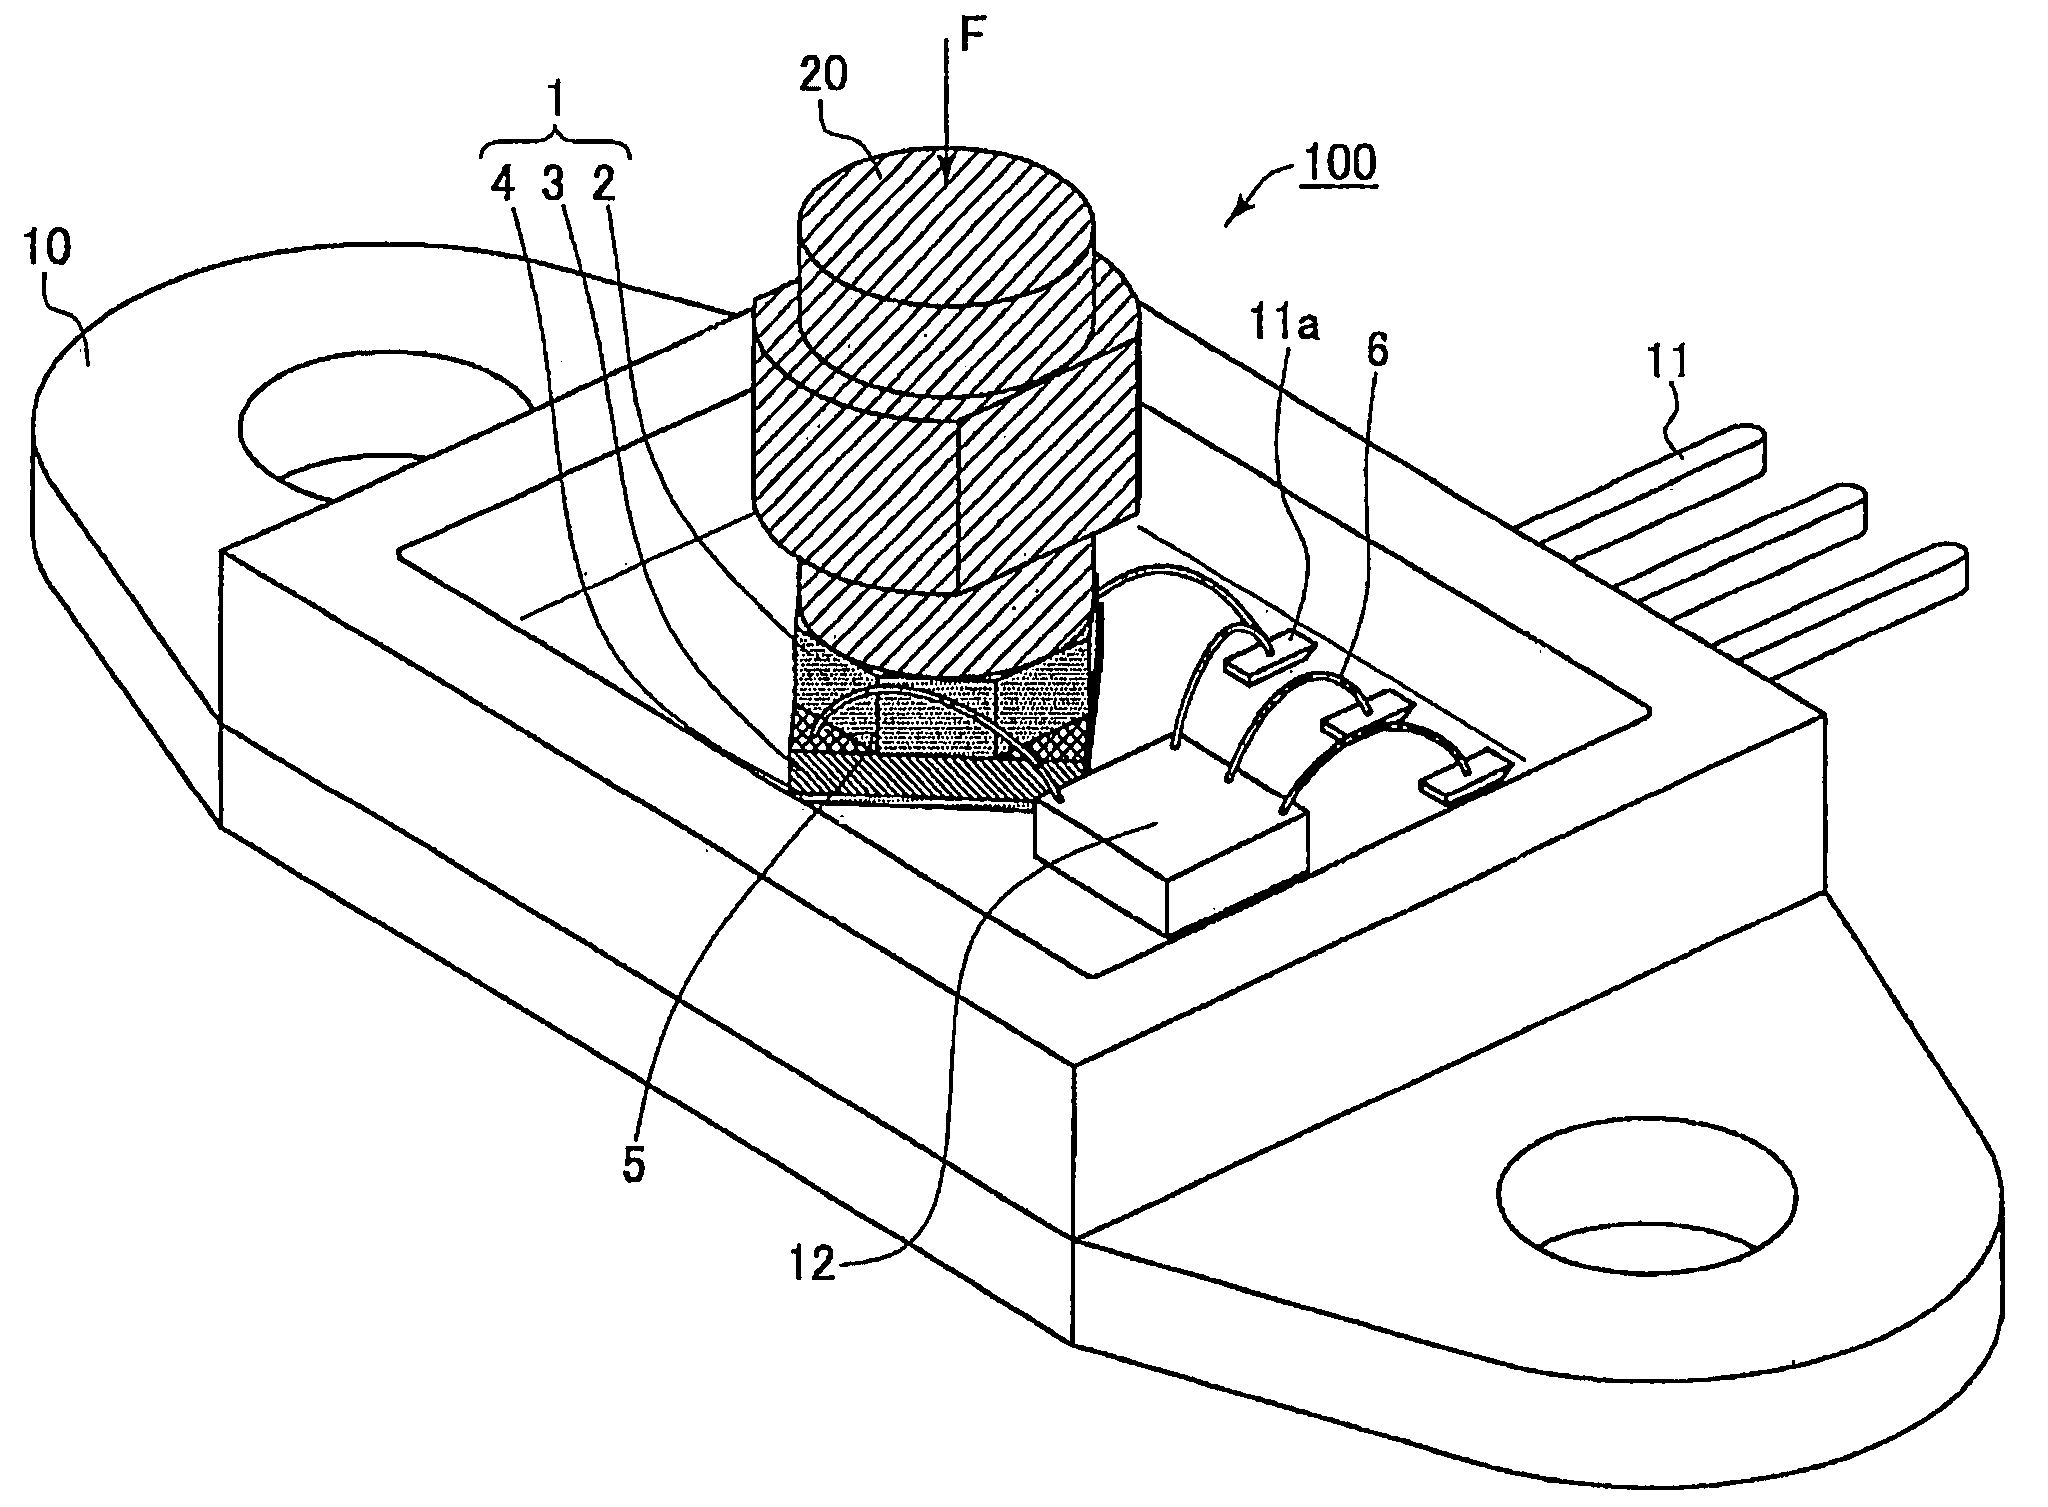 Physical quantity sensing element having improved structure suitable for electrical connection and method of fabricating same